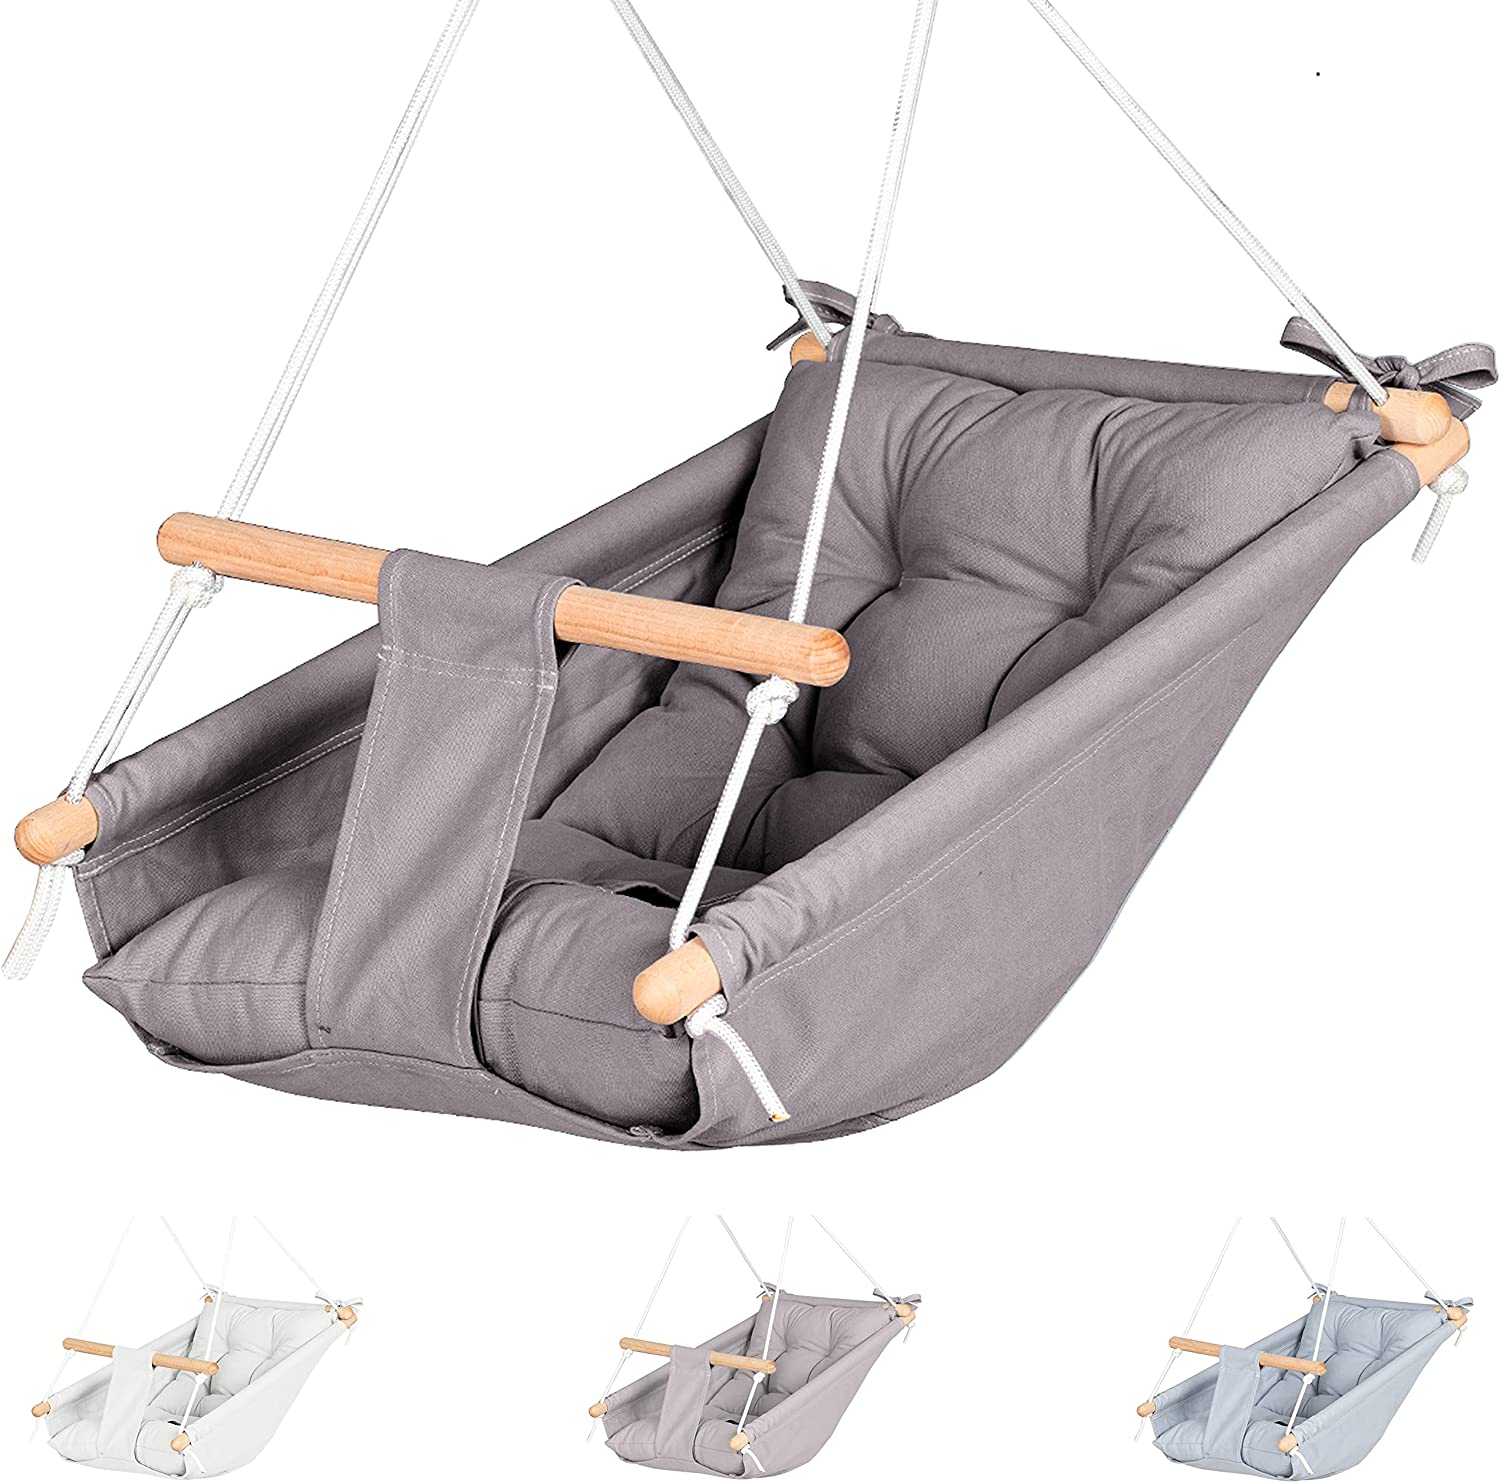 Baby Hammock Chair Birthday Gift. Wooden Hanging Swing Seat Chair for Baby with Safety Belt and mounting Hardware Cateam Canvas Baby Hammock Swing Ivory 